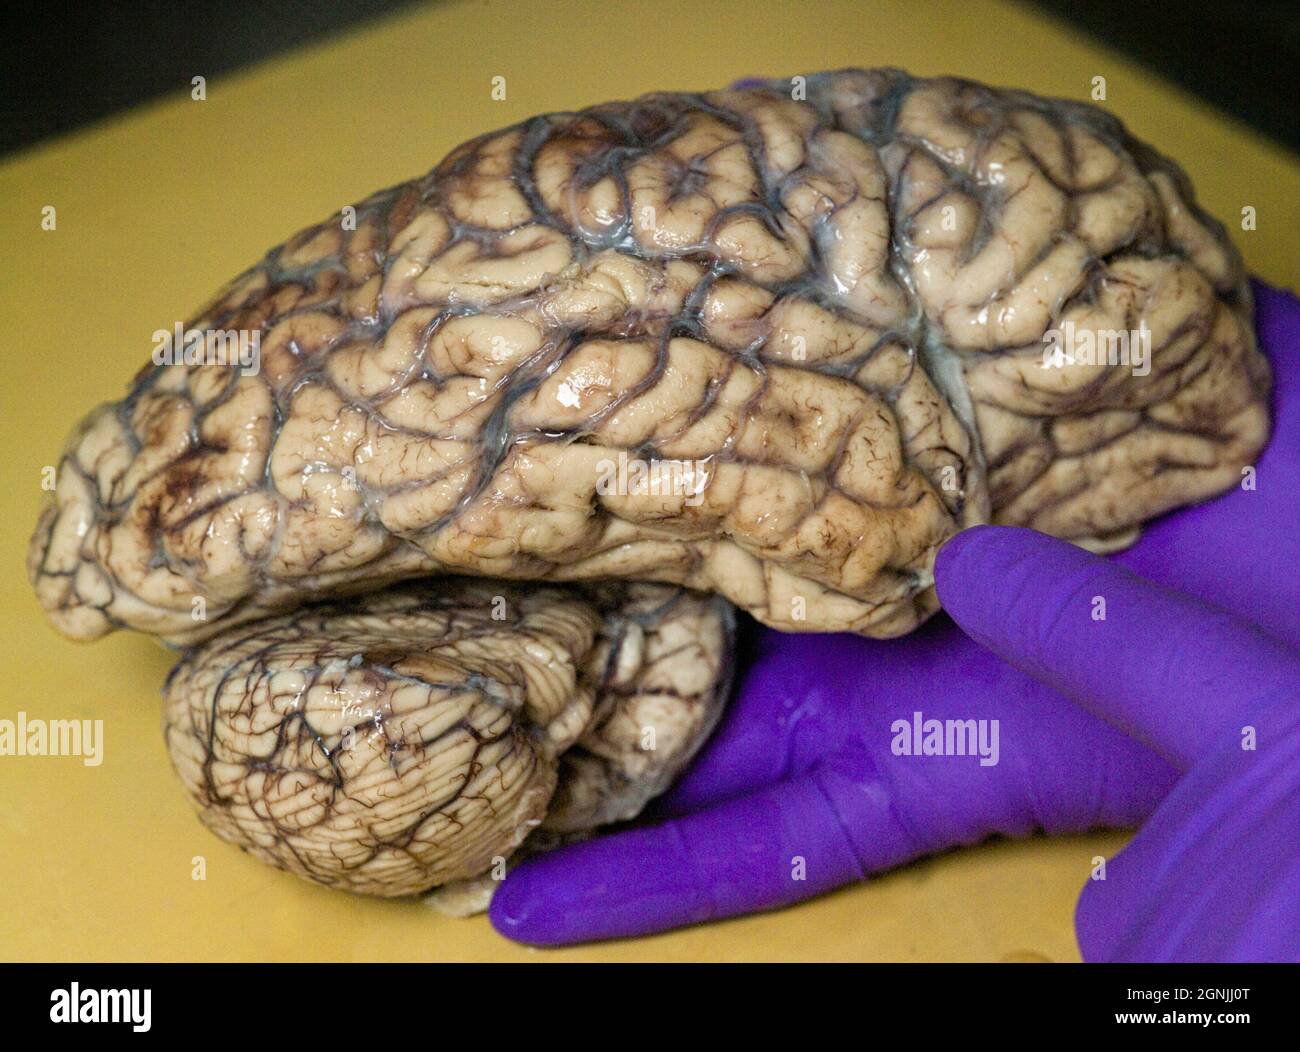 Technician holds hemisphere of human brain, which has been treated with formalin for preservation, before storage in brain bank for medical research Stock Photo